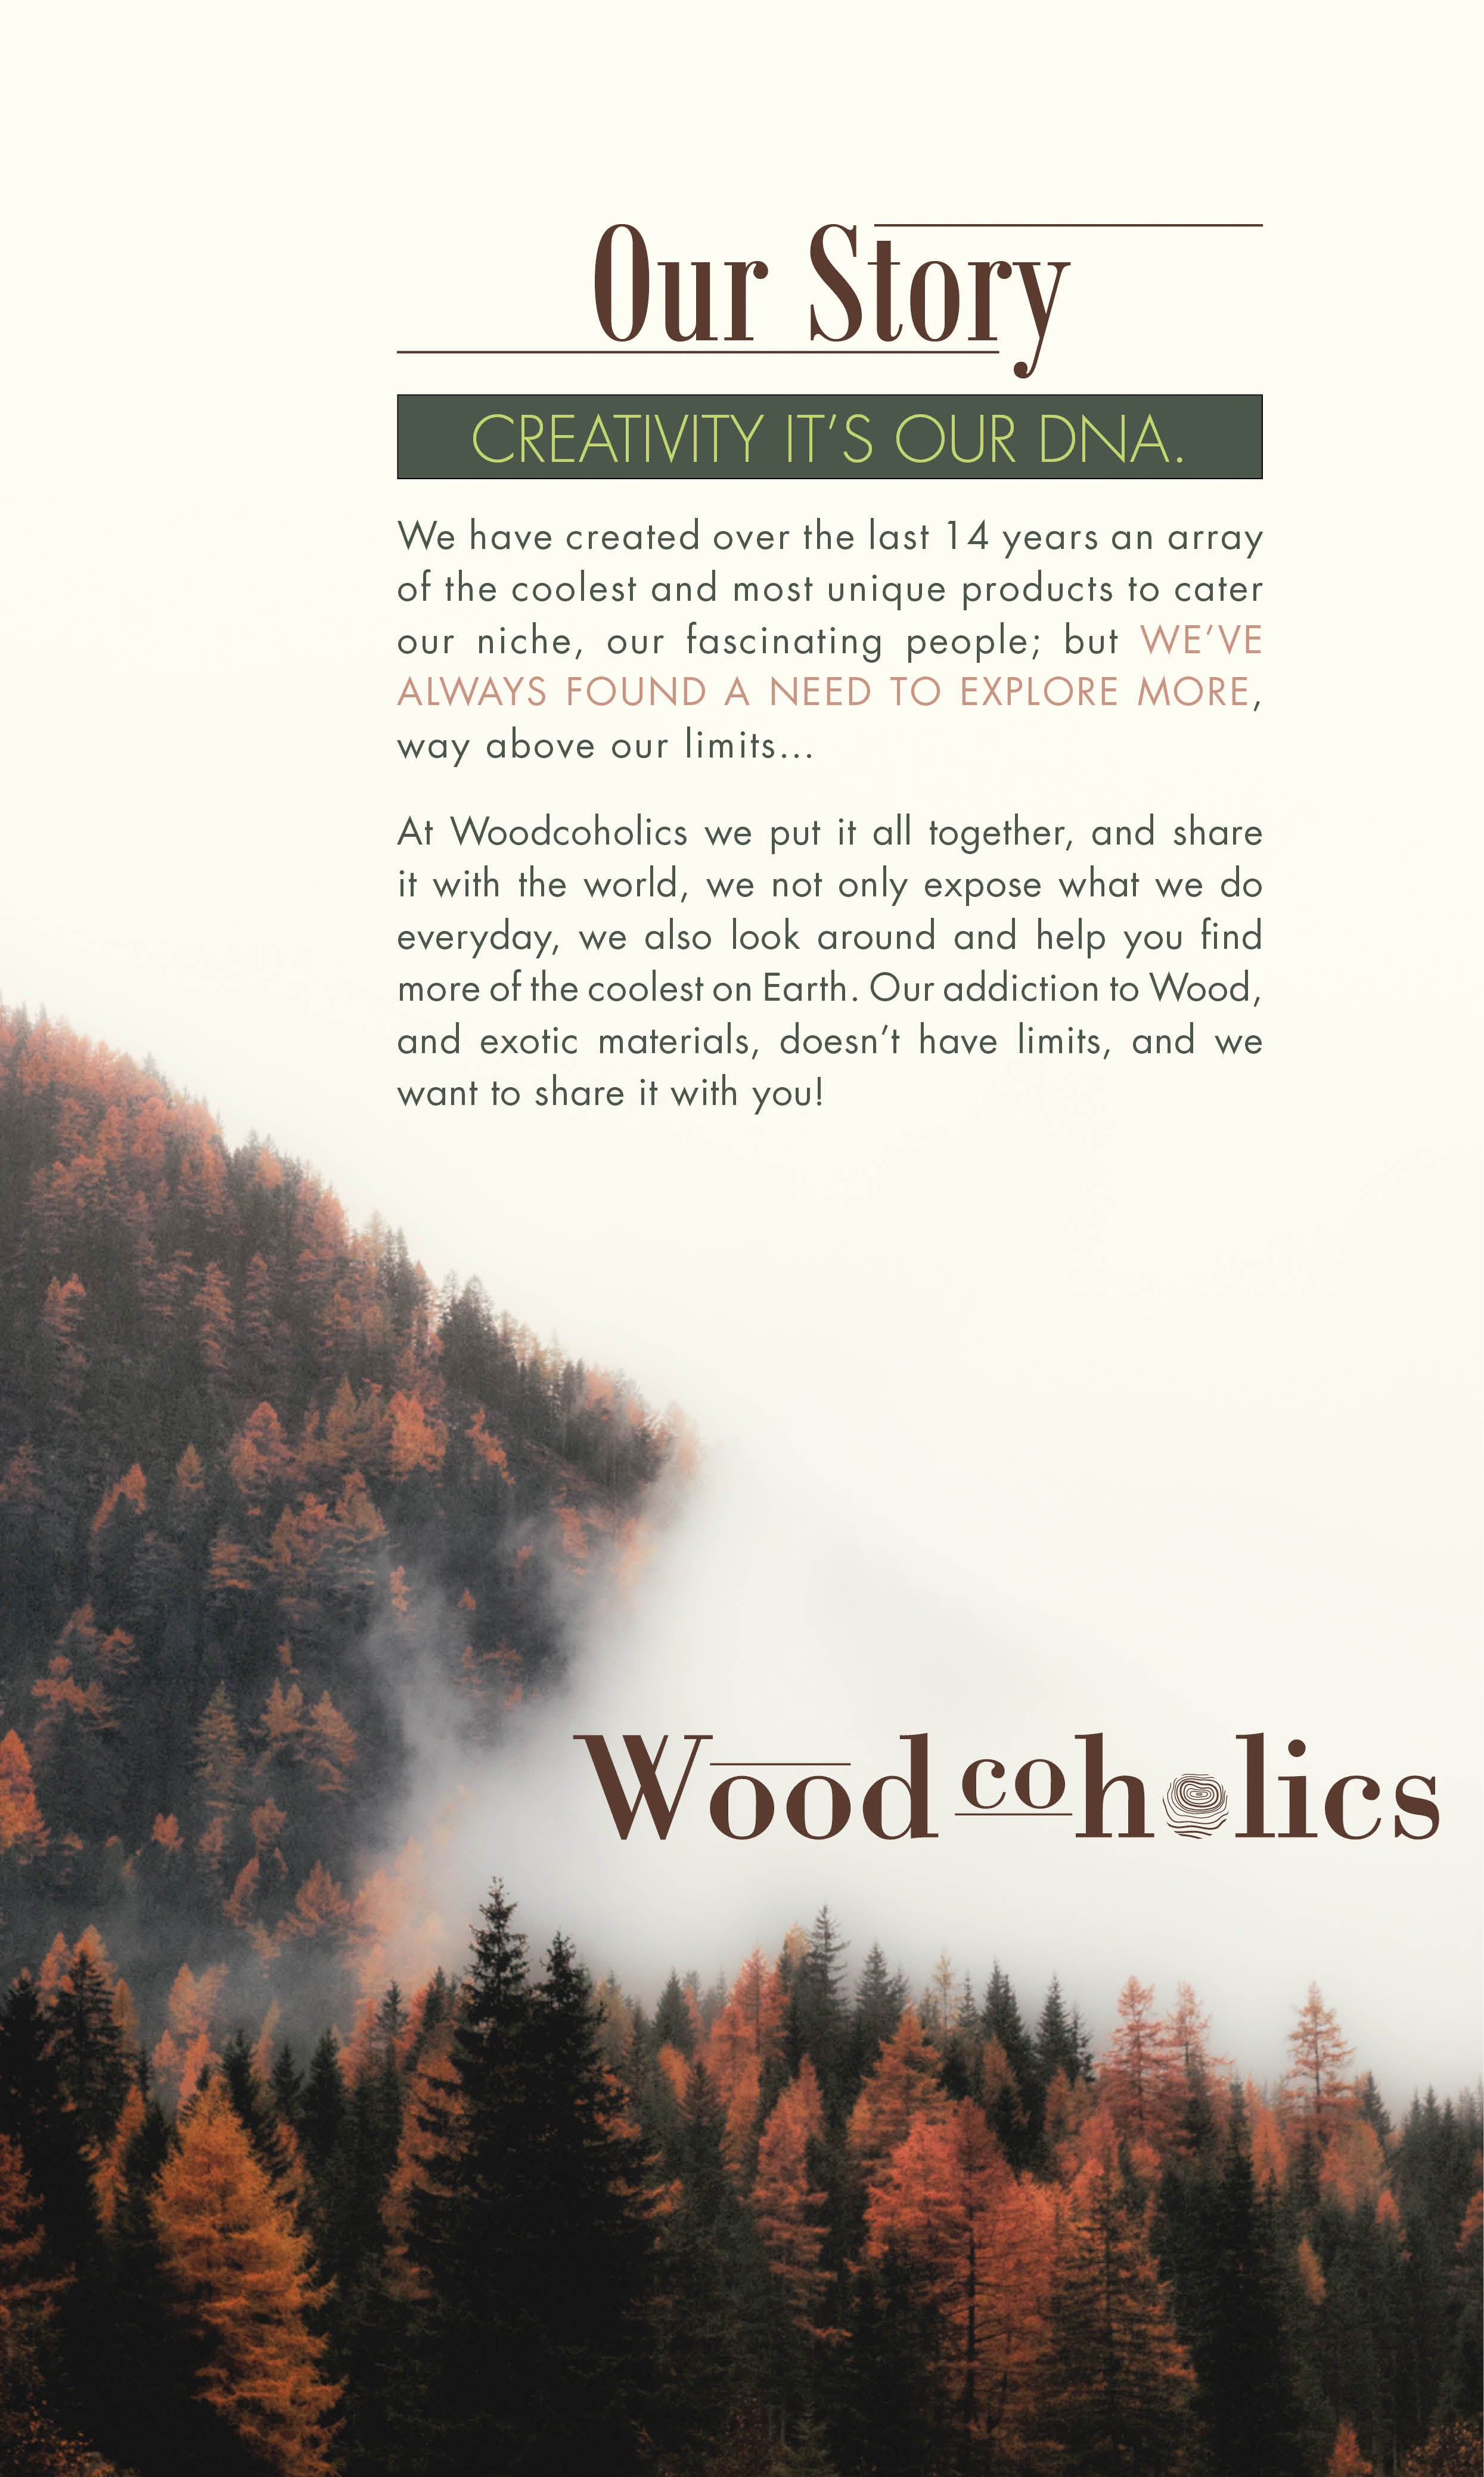 Our Story  Creativity it’s our DNA. We have created over the last 14 years an array of the coolest and most unique products to cater our niche, our fascinating people; but we’ve always found a need to explore more, way above our limits…  At Woodcoholics we put it all together, and share it with the world, we not only expose what we do everyday, we also look around and help you find more of the coolest on Earth. Our addiction to Wood, and exotic materials, doesn’t have limits, and we want to share it with you!